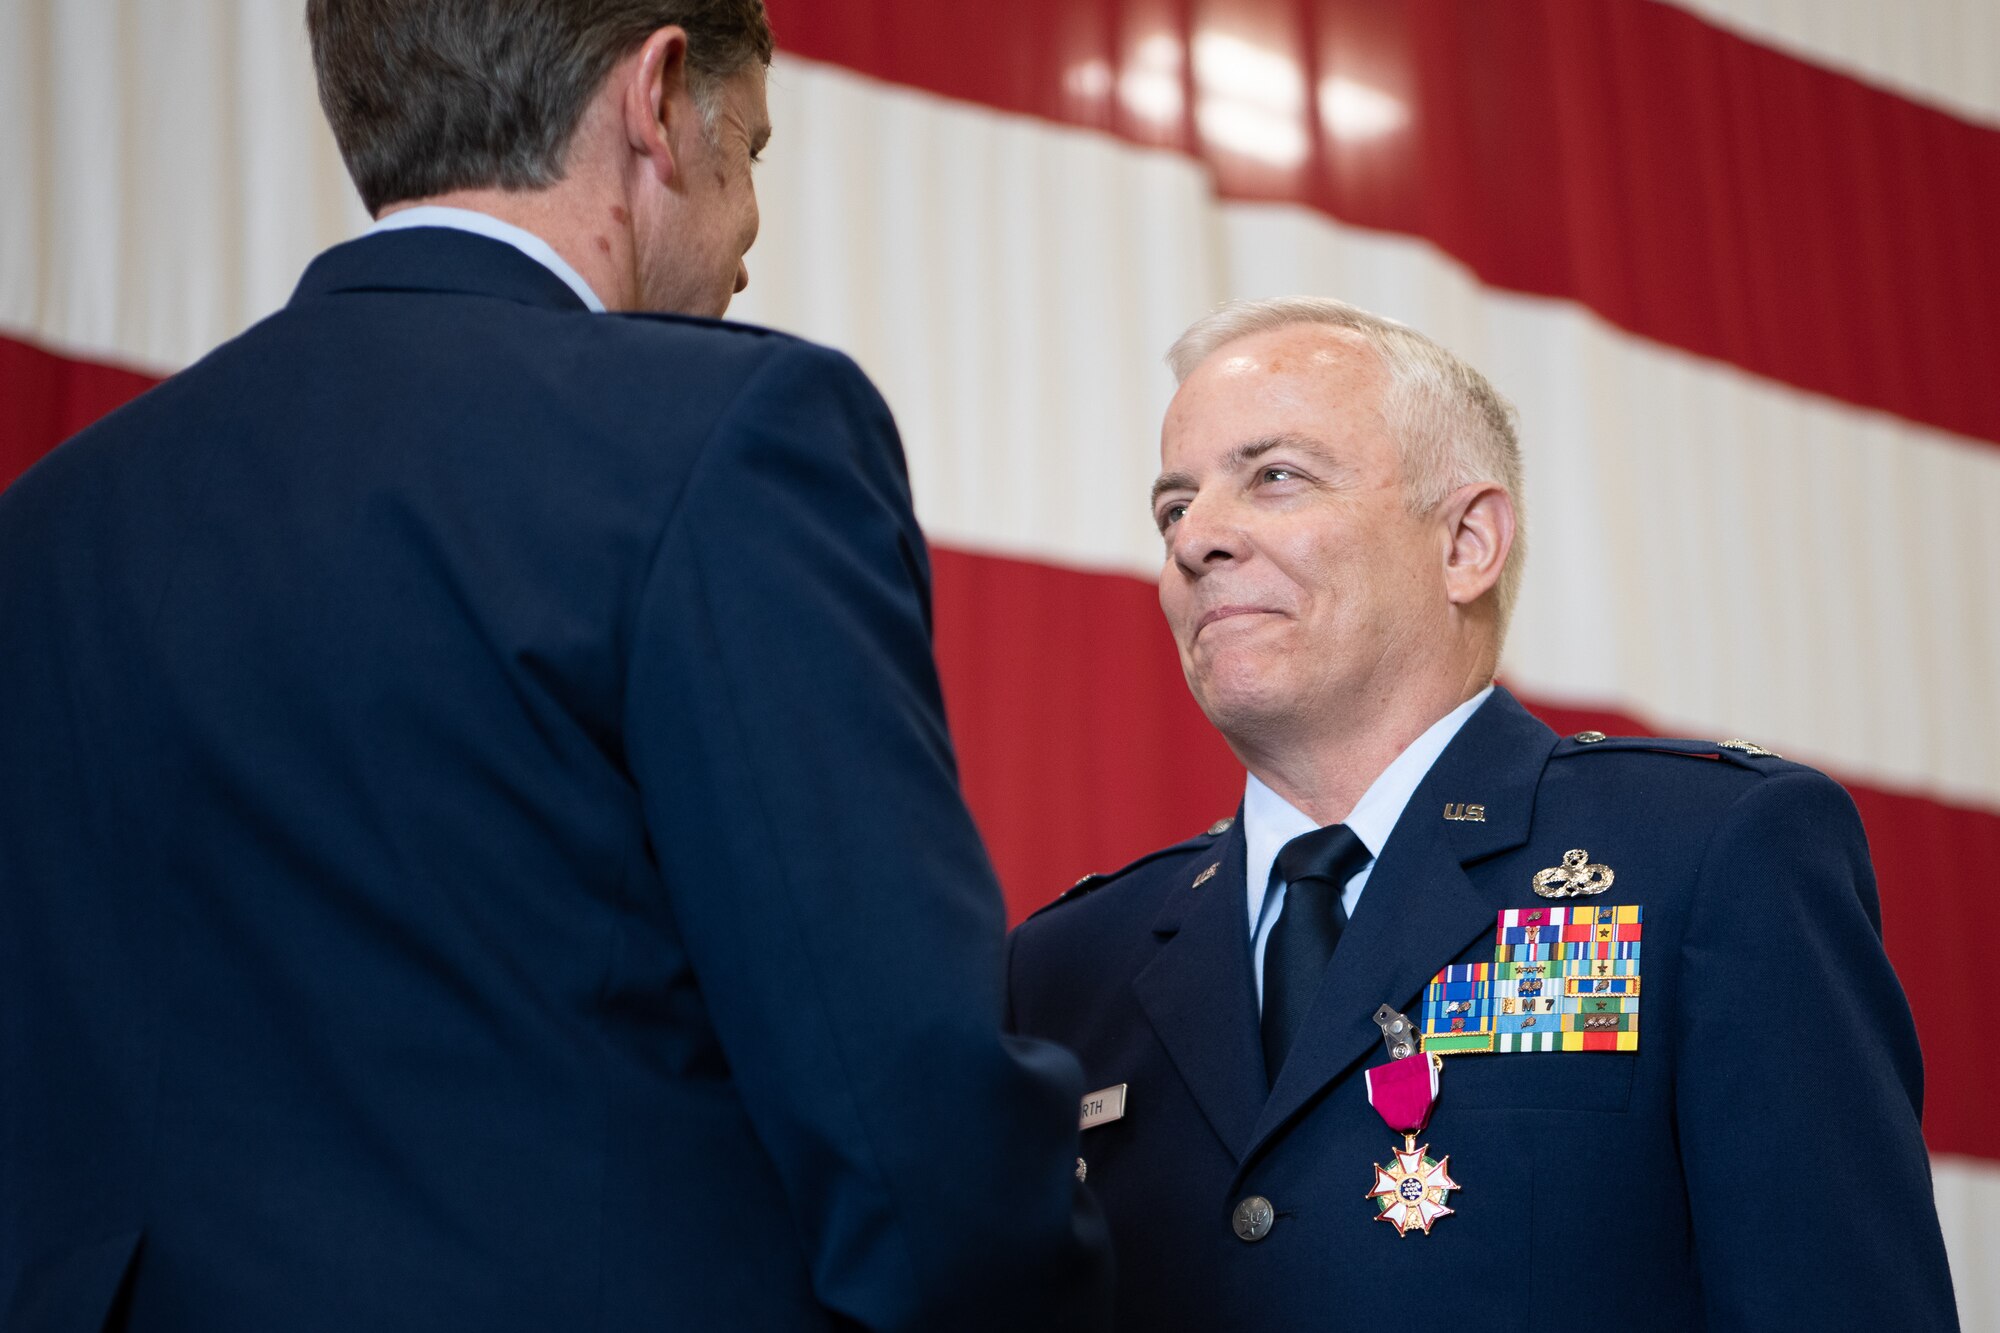 Col. Douglas D. Hayworth, 137th Special Operations Wing vice commander, receives the Legion of Merit from Brig. Gen. Thomas W. Ryan, Assistant Adjutant General - Air, Oklahoma National Guard, for Hayworth's service to the 137th SOW at Will Rogers Air National Guard Base in Oklahoma City, May 4, 2018. Hayworth retired after serving more than 30 years with the Wing. (U.S. Air National Guard Photo by Tech. Sgt. Kasey M. Phipps)